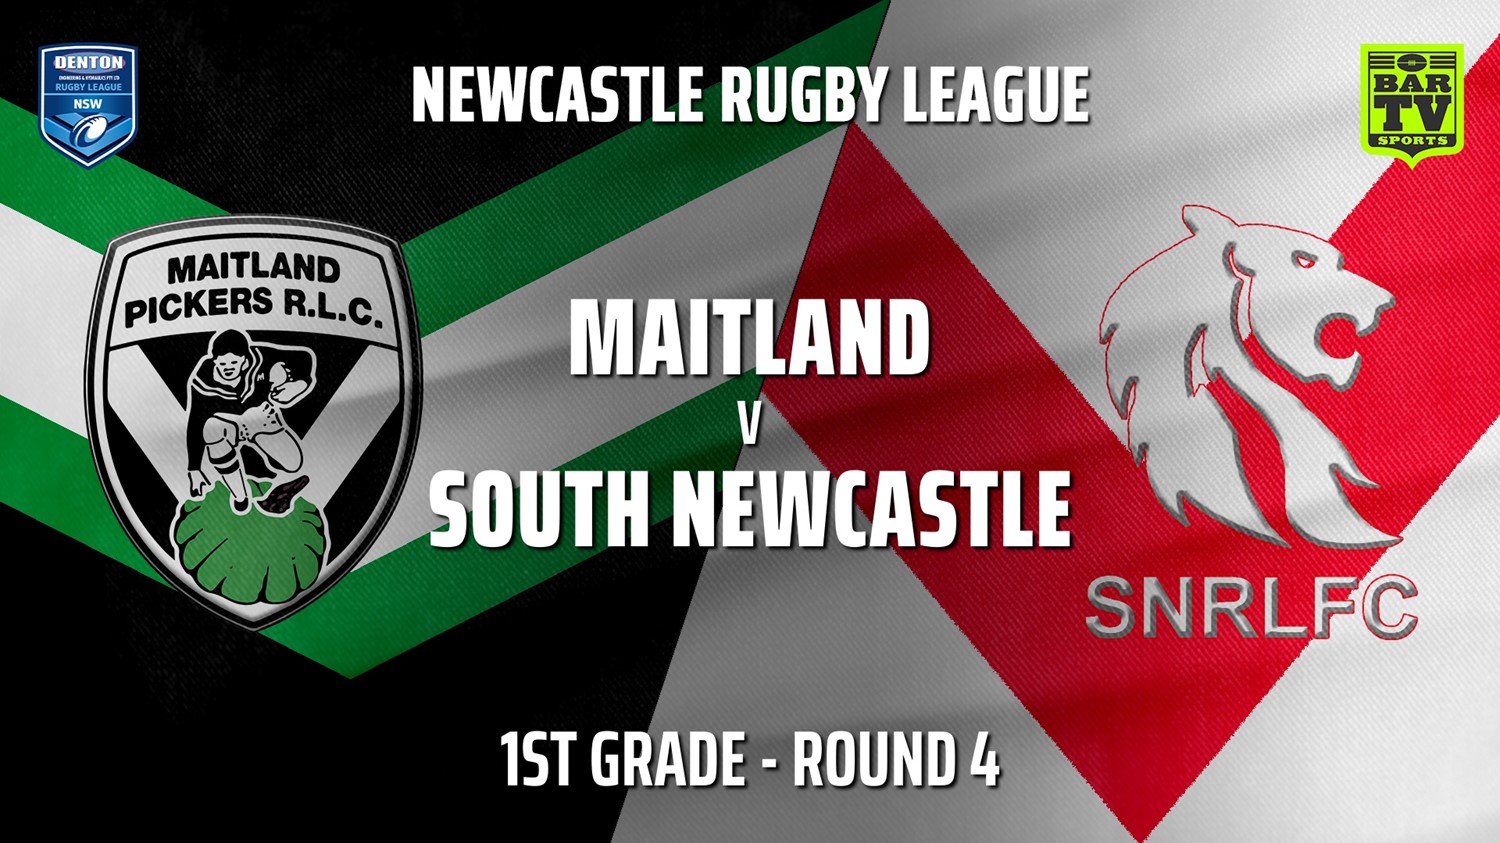 Newcastle Rugby League Round 4 - 1st Grade - Maitland Pickers v South Newcastle Slate Image